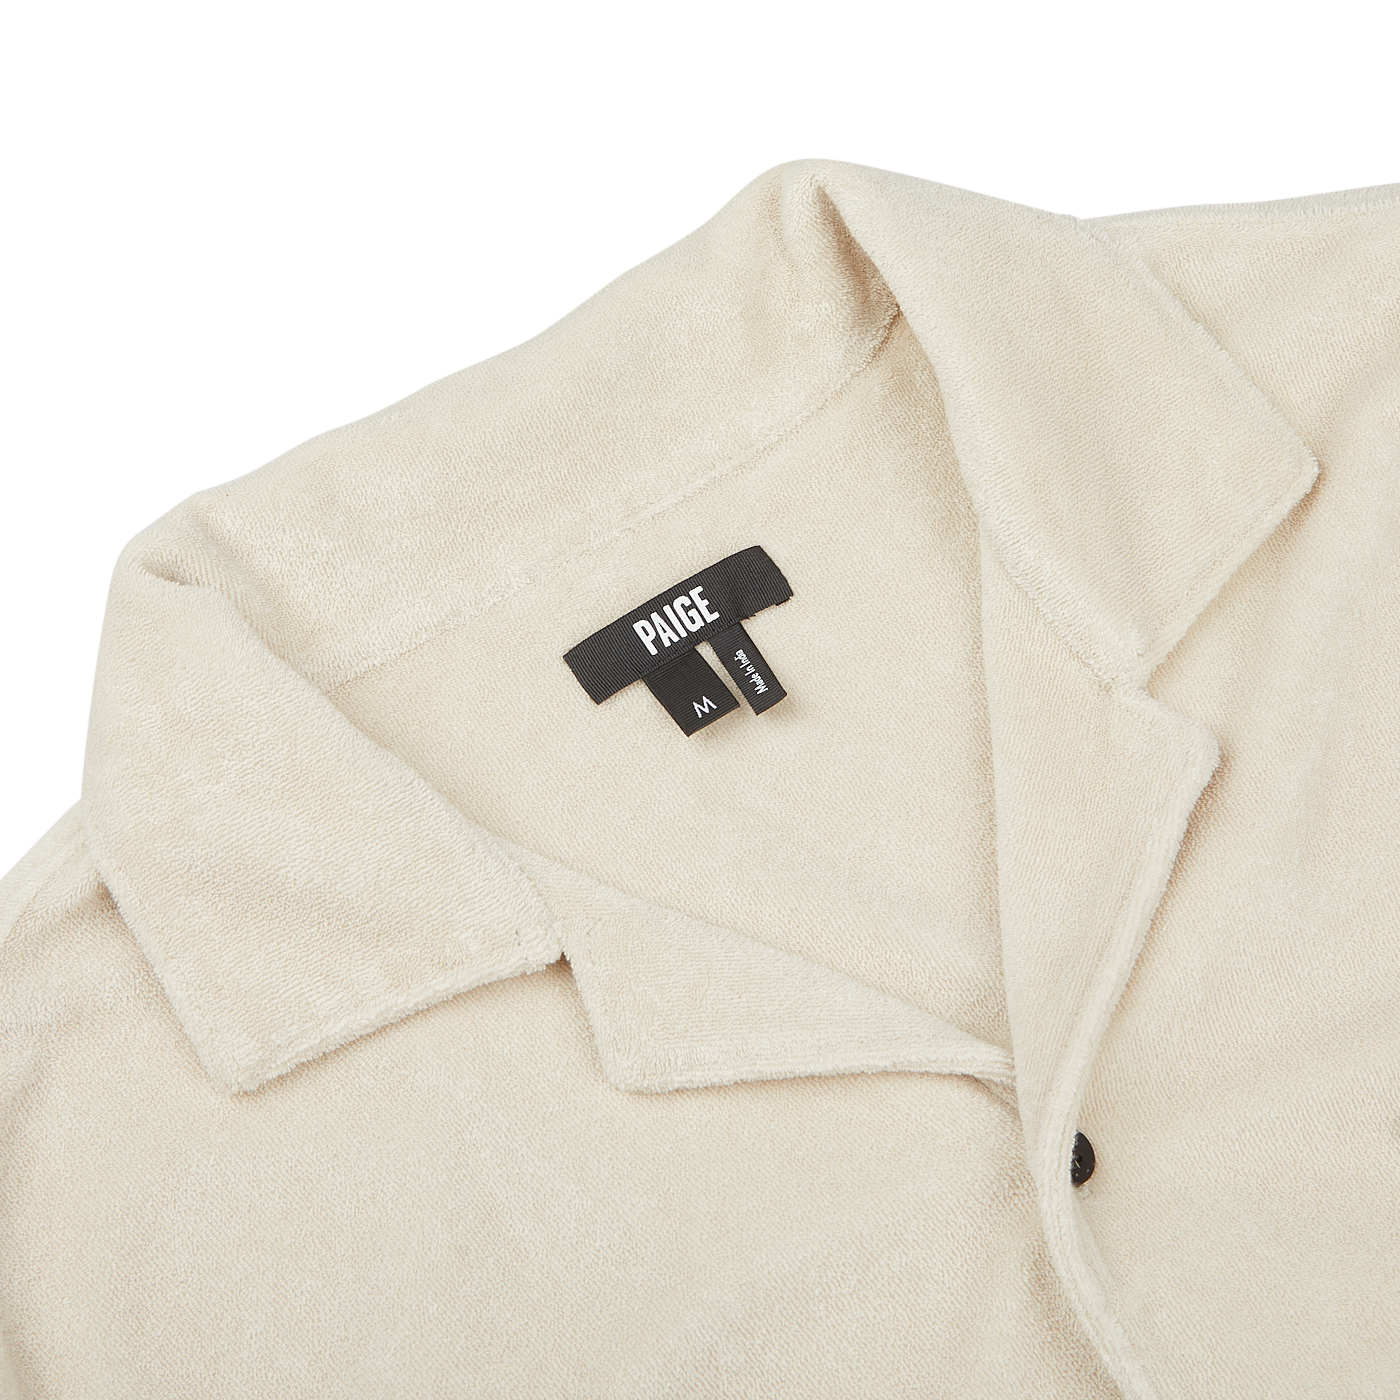 Close-up of a Cream Beige Cotton Towelling Polo Shirt with a front button opening, collared design, and a black fabric tag displaying the brand "Paige" and size "M".